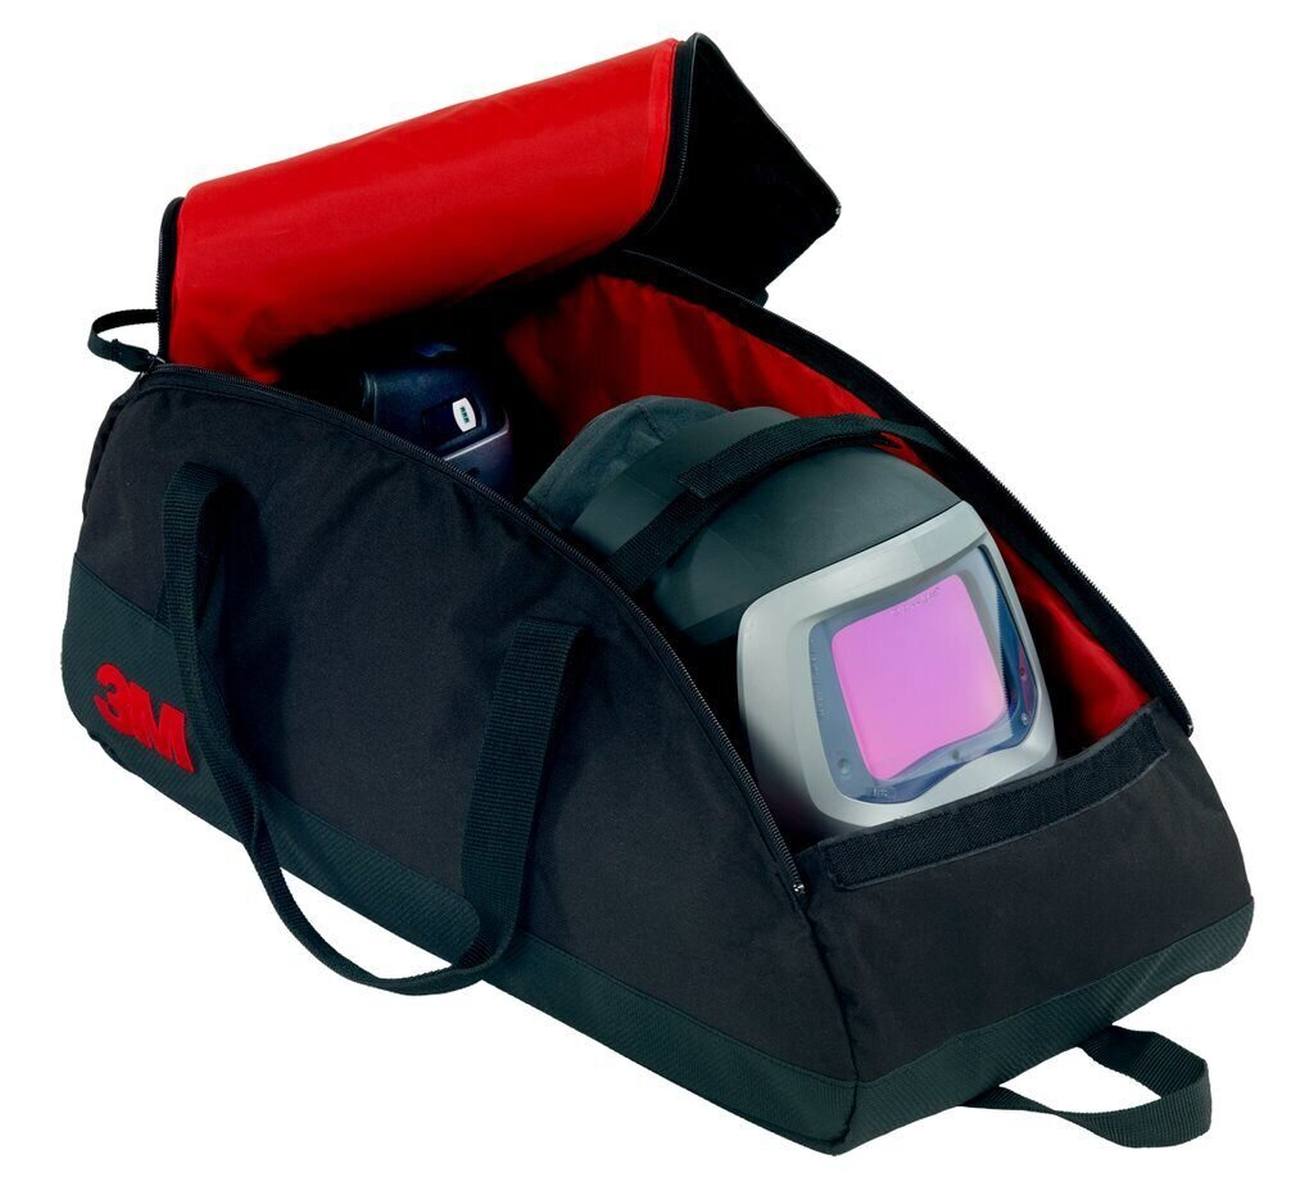 3M Speedglas 9100 Air welding mask with 9100V ADF, incl. air hose, incl. storage bag 79 01 01 - TH2 upgrade kit #569005